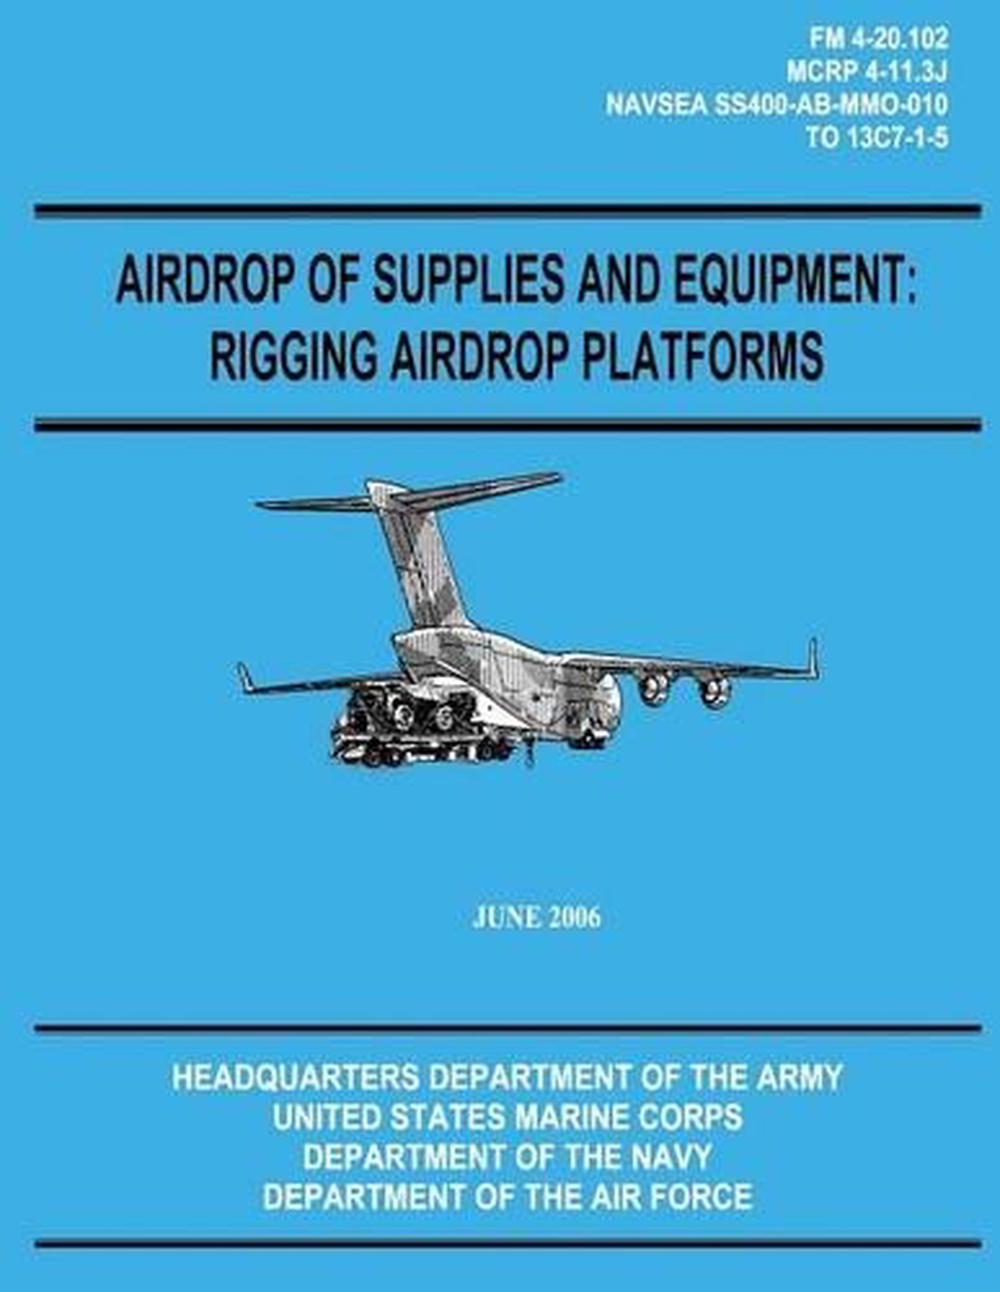 Airdrop of Supplies and Equipment: Rigging Airdrop Platforms (FM 4-20.